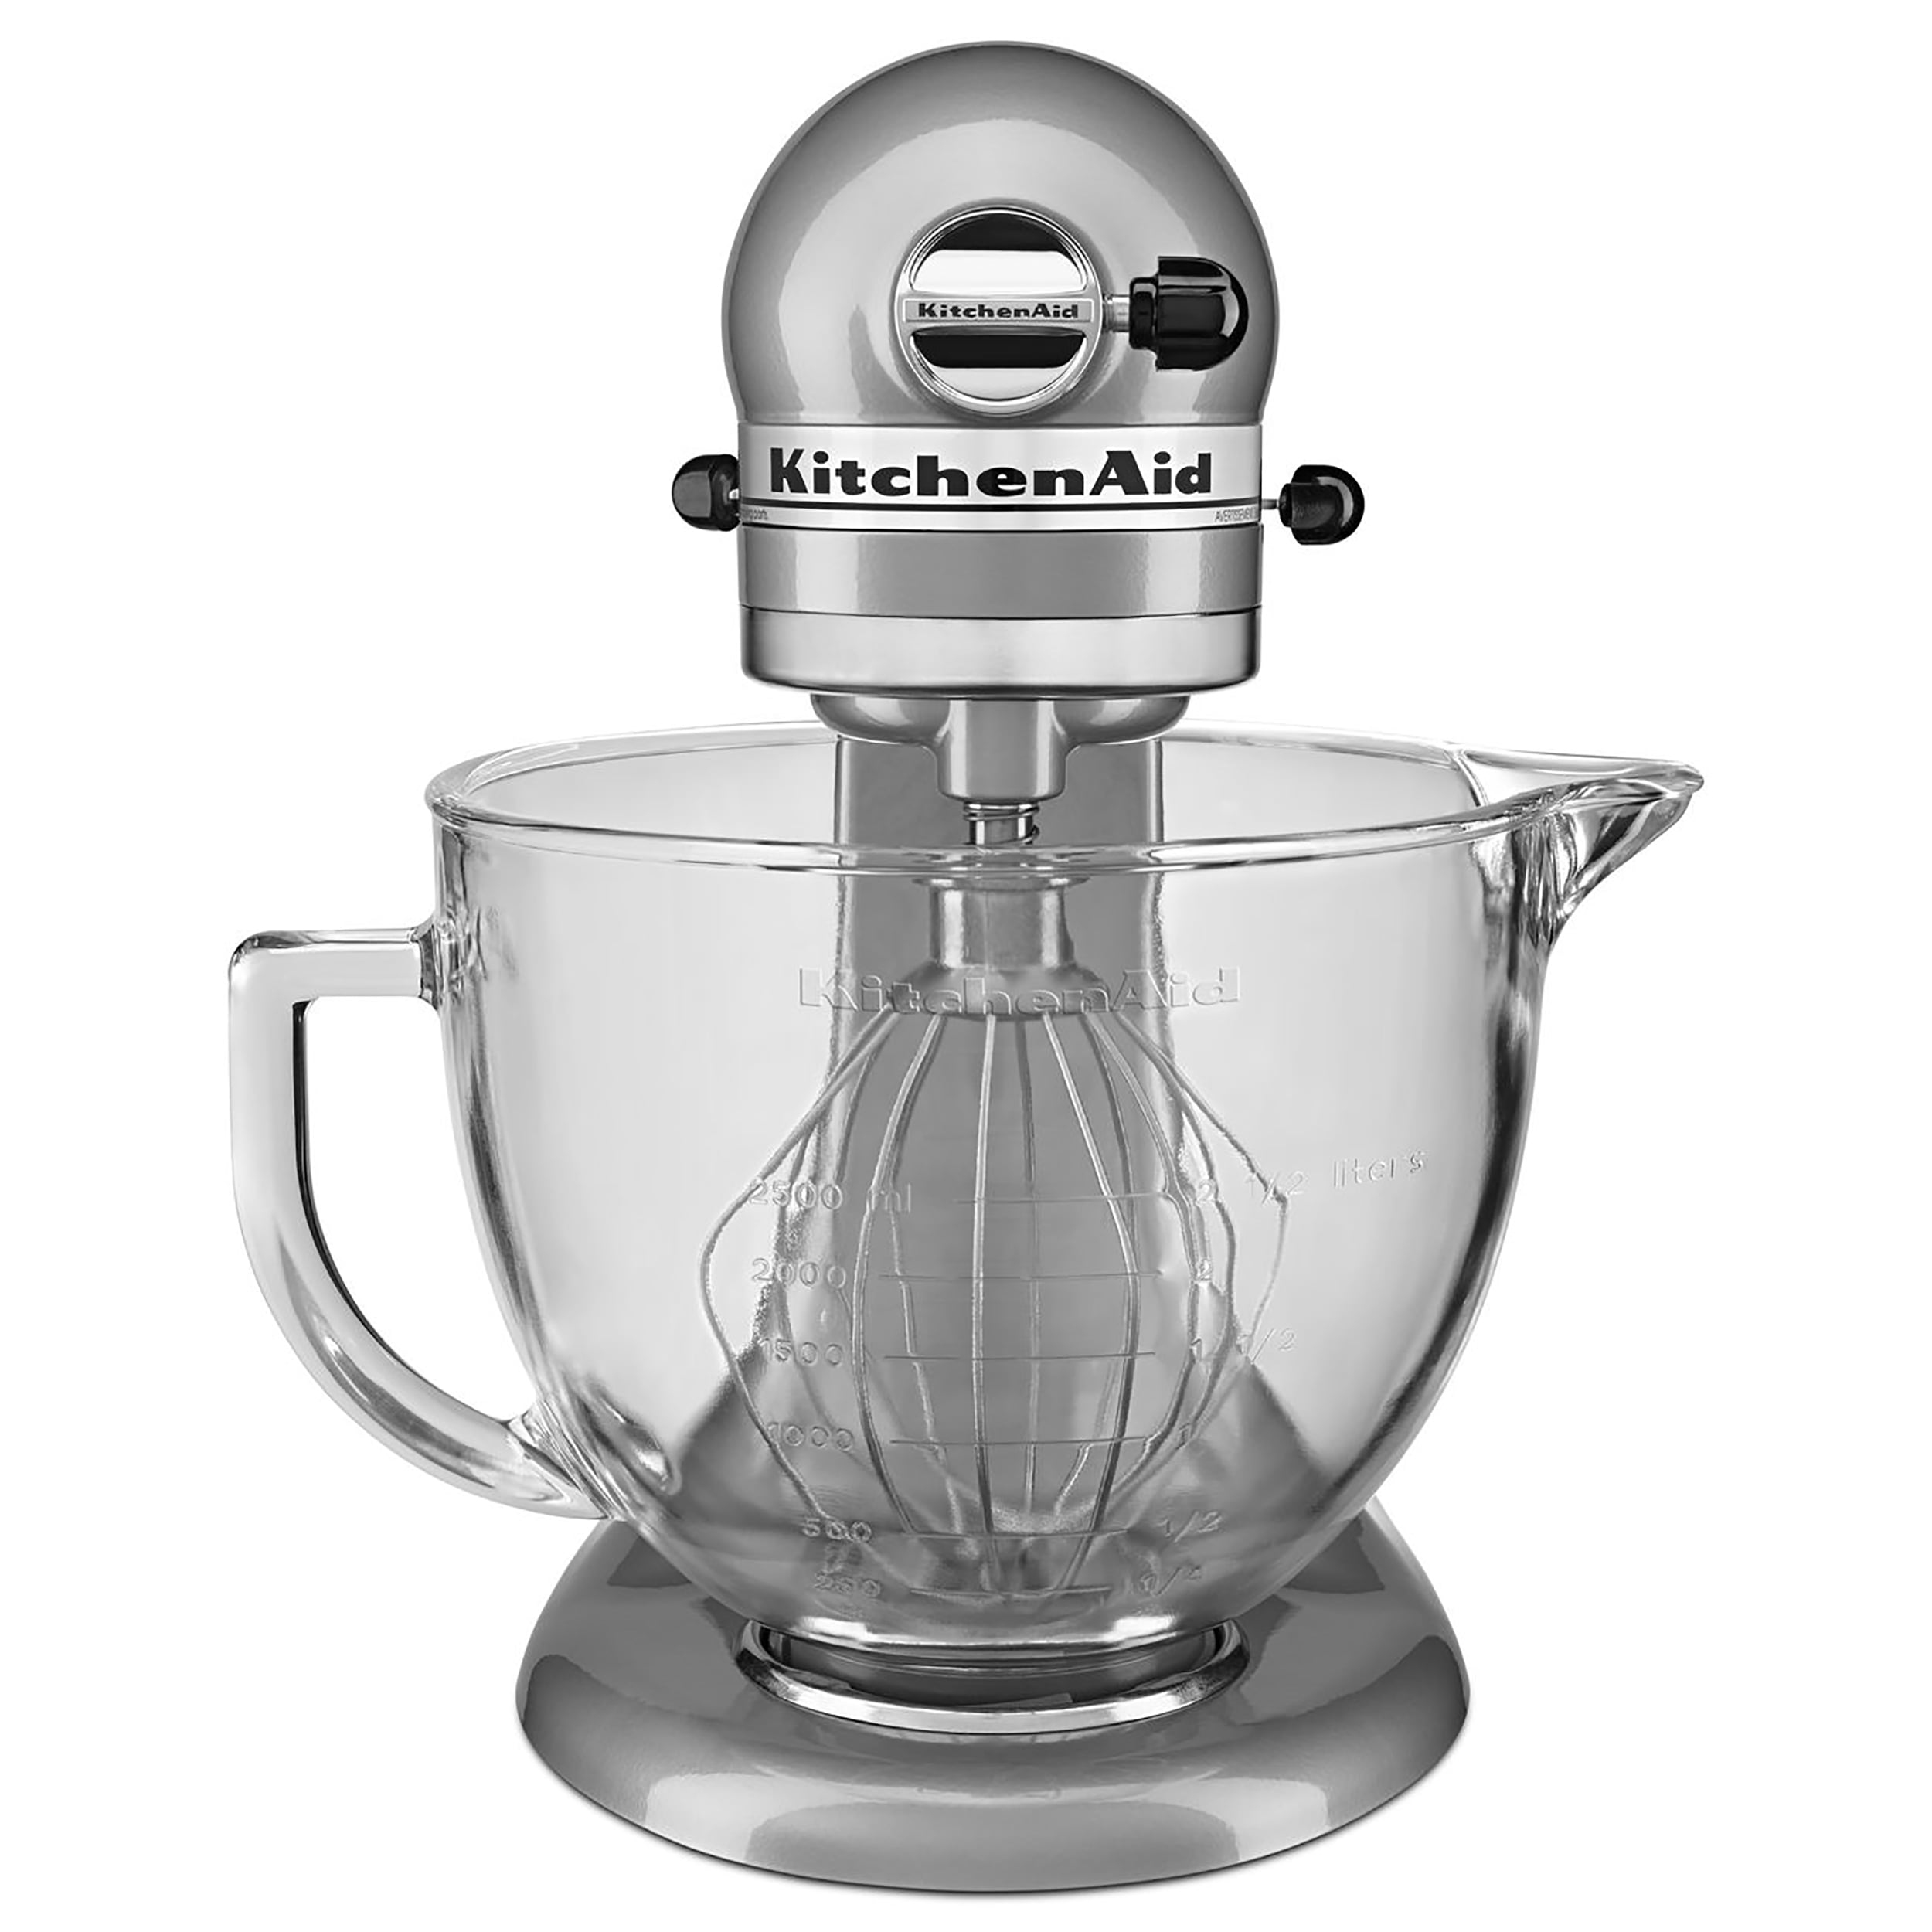 W10223140G in Other by KitchenAid in Poplar Bluff, MO - Lid for 5 Quart  Tilt Head Stand Mixer Glass Bowls (Fits models K5GB, K5GBF, K5GBH)